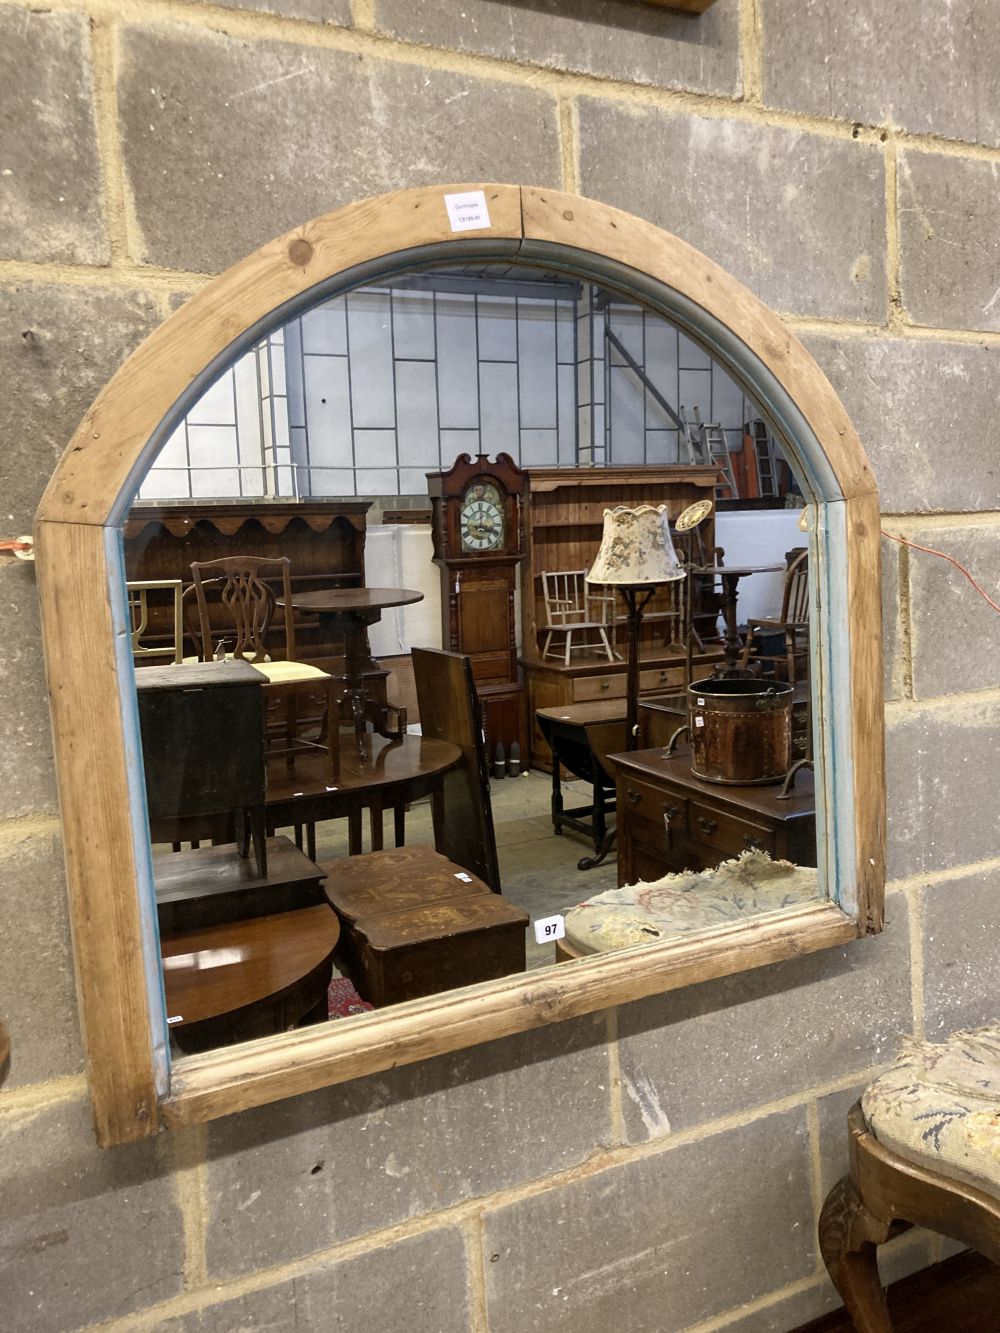 A Victorian pine framed arched wall mirror, width 90cm height 81cm